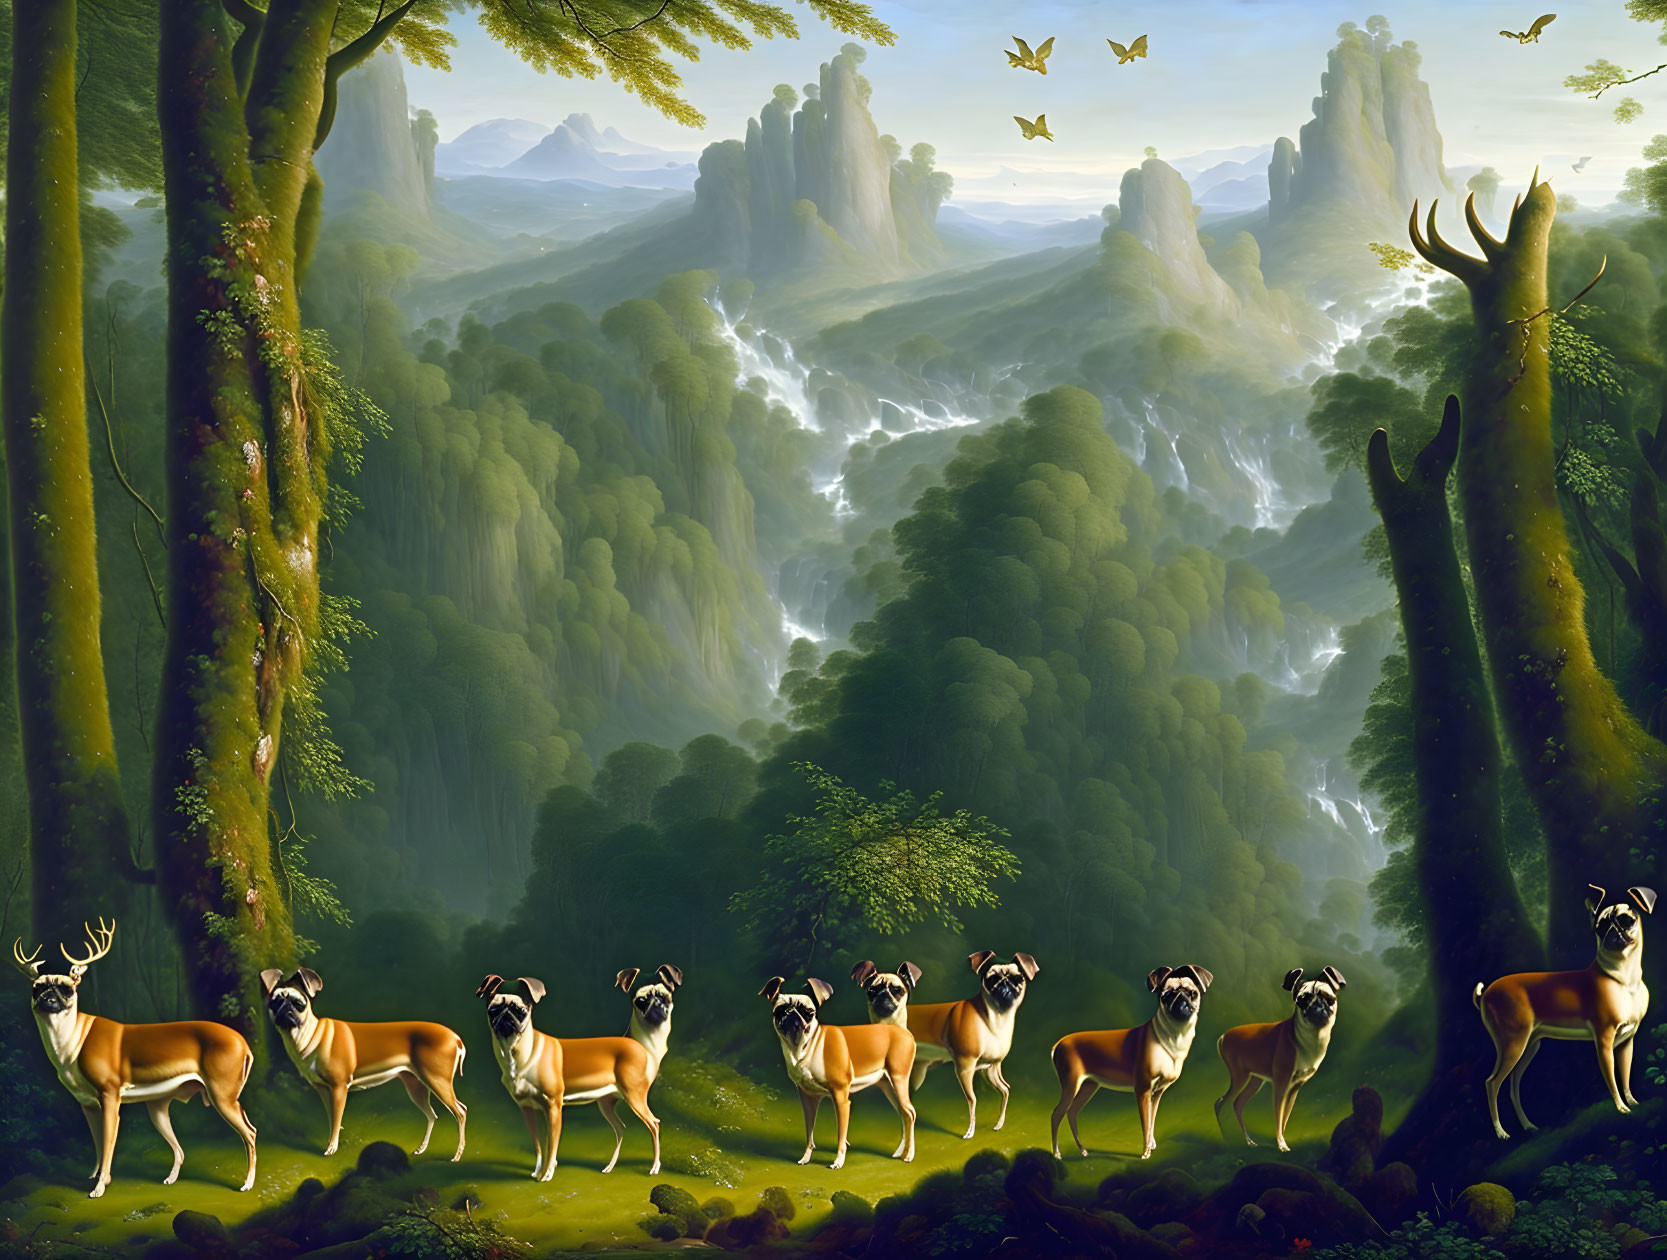 Fantasy landscape with greenery, waterfalls, cliffs, and deer.